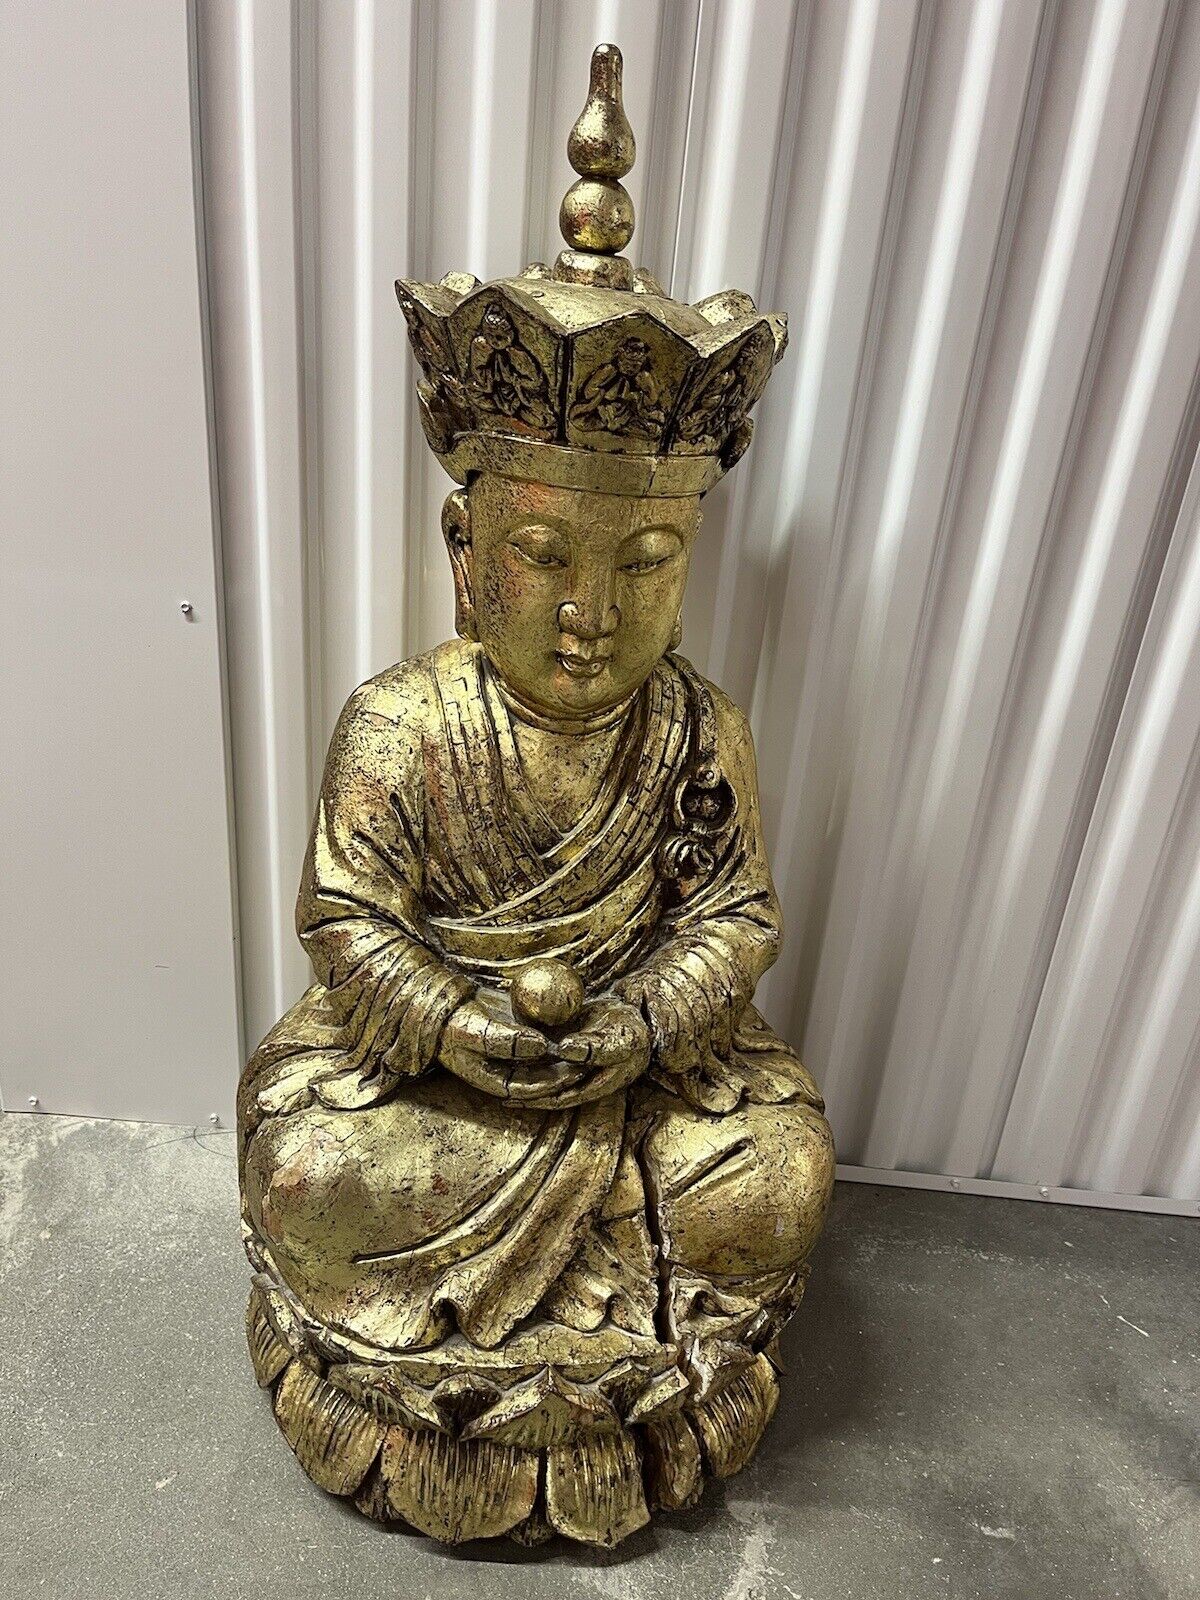 Antique Asian Buddha Sitting Temple Statue Large Carved Wood Colored Gold 64 Lb